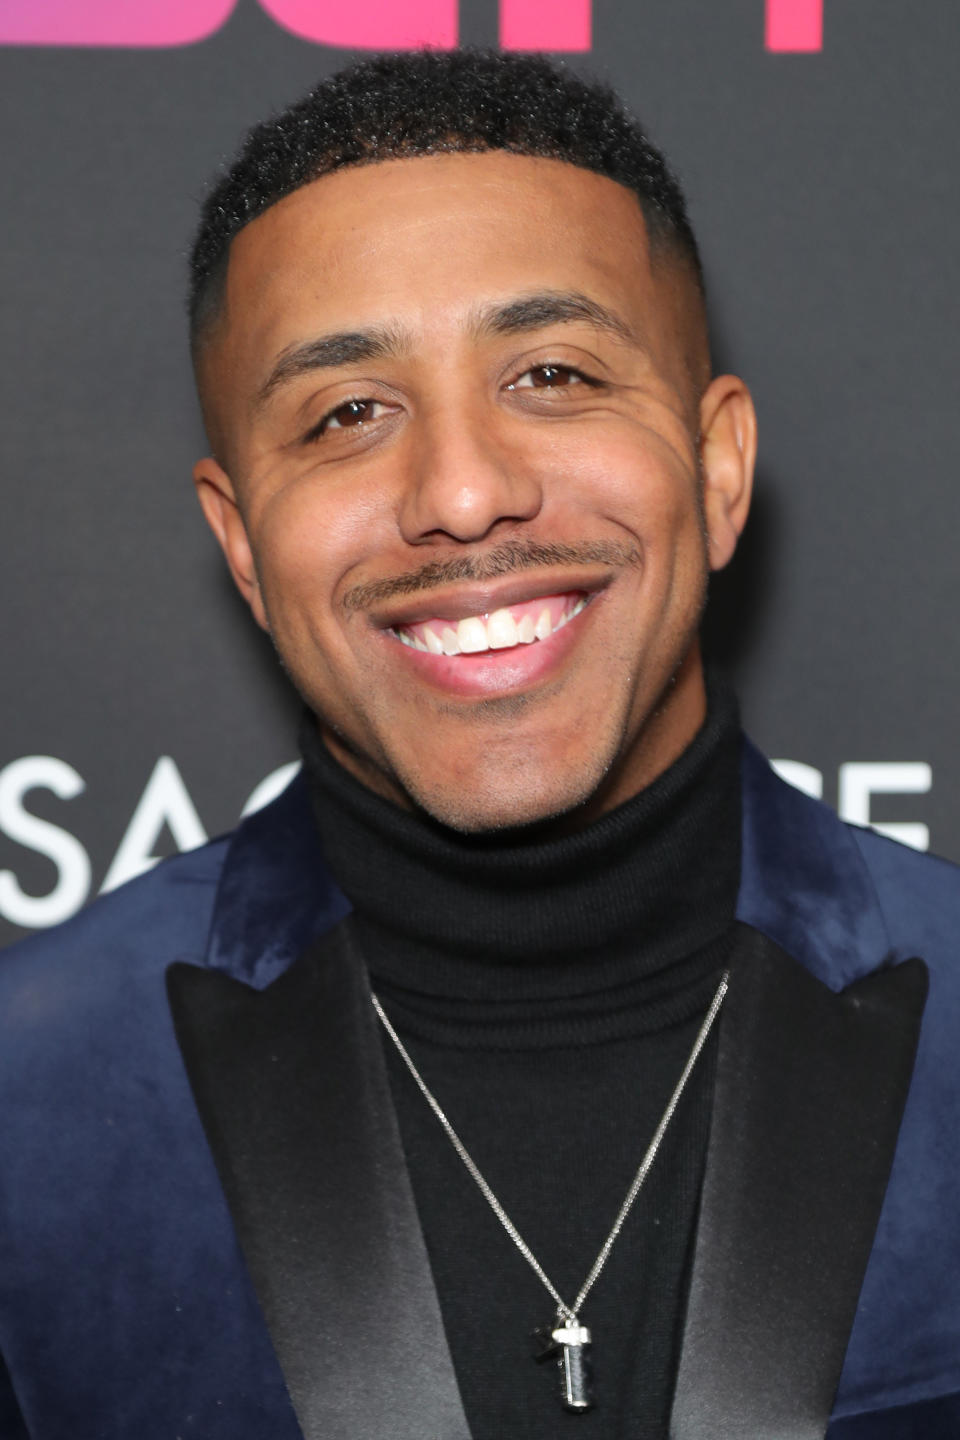 Marques Houston at the premiere of "Sacrifice" on December 11, 2019